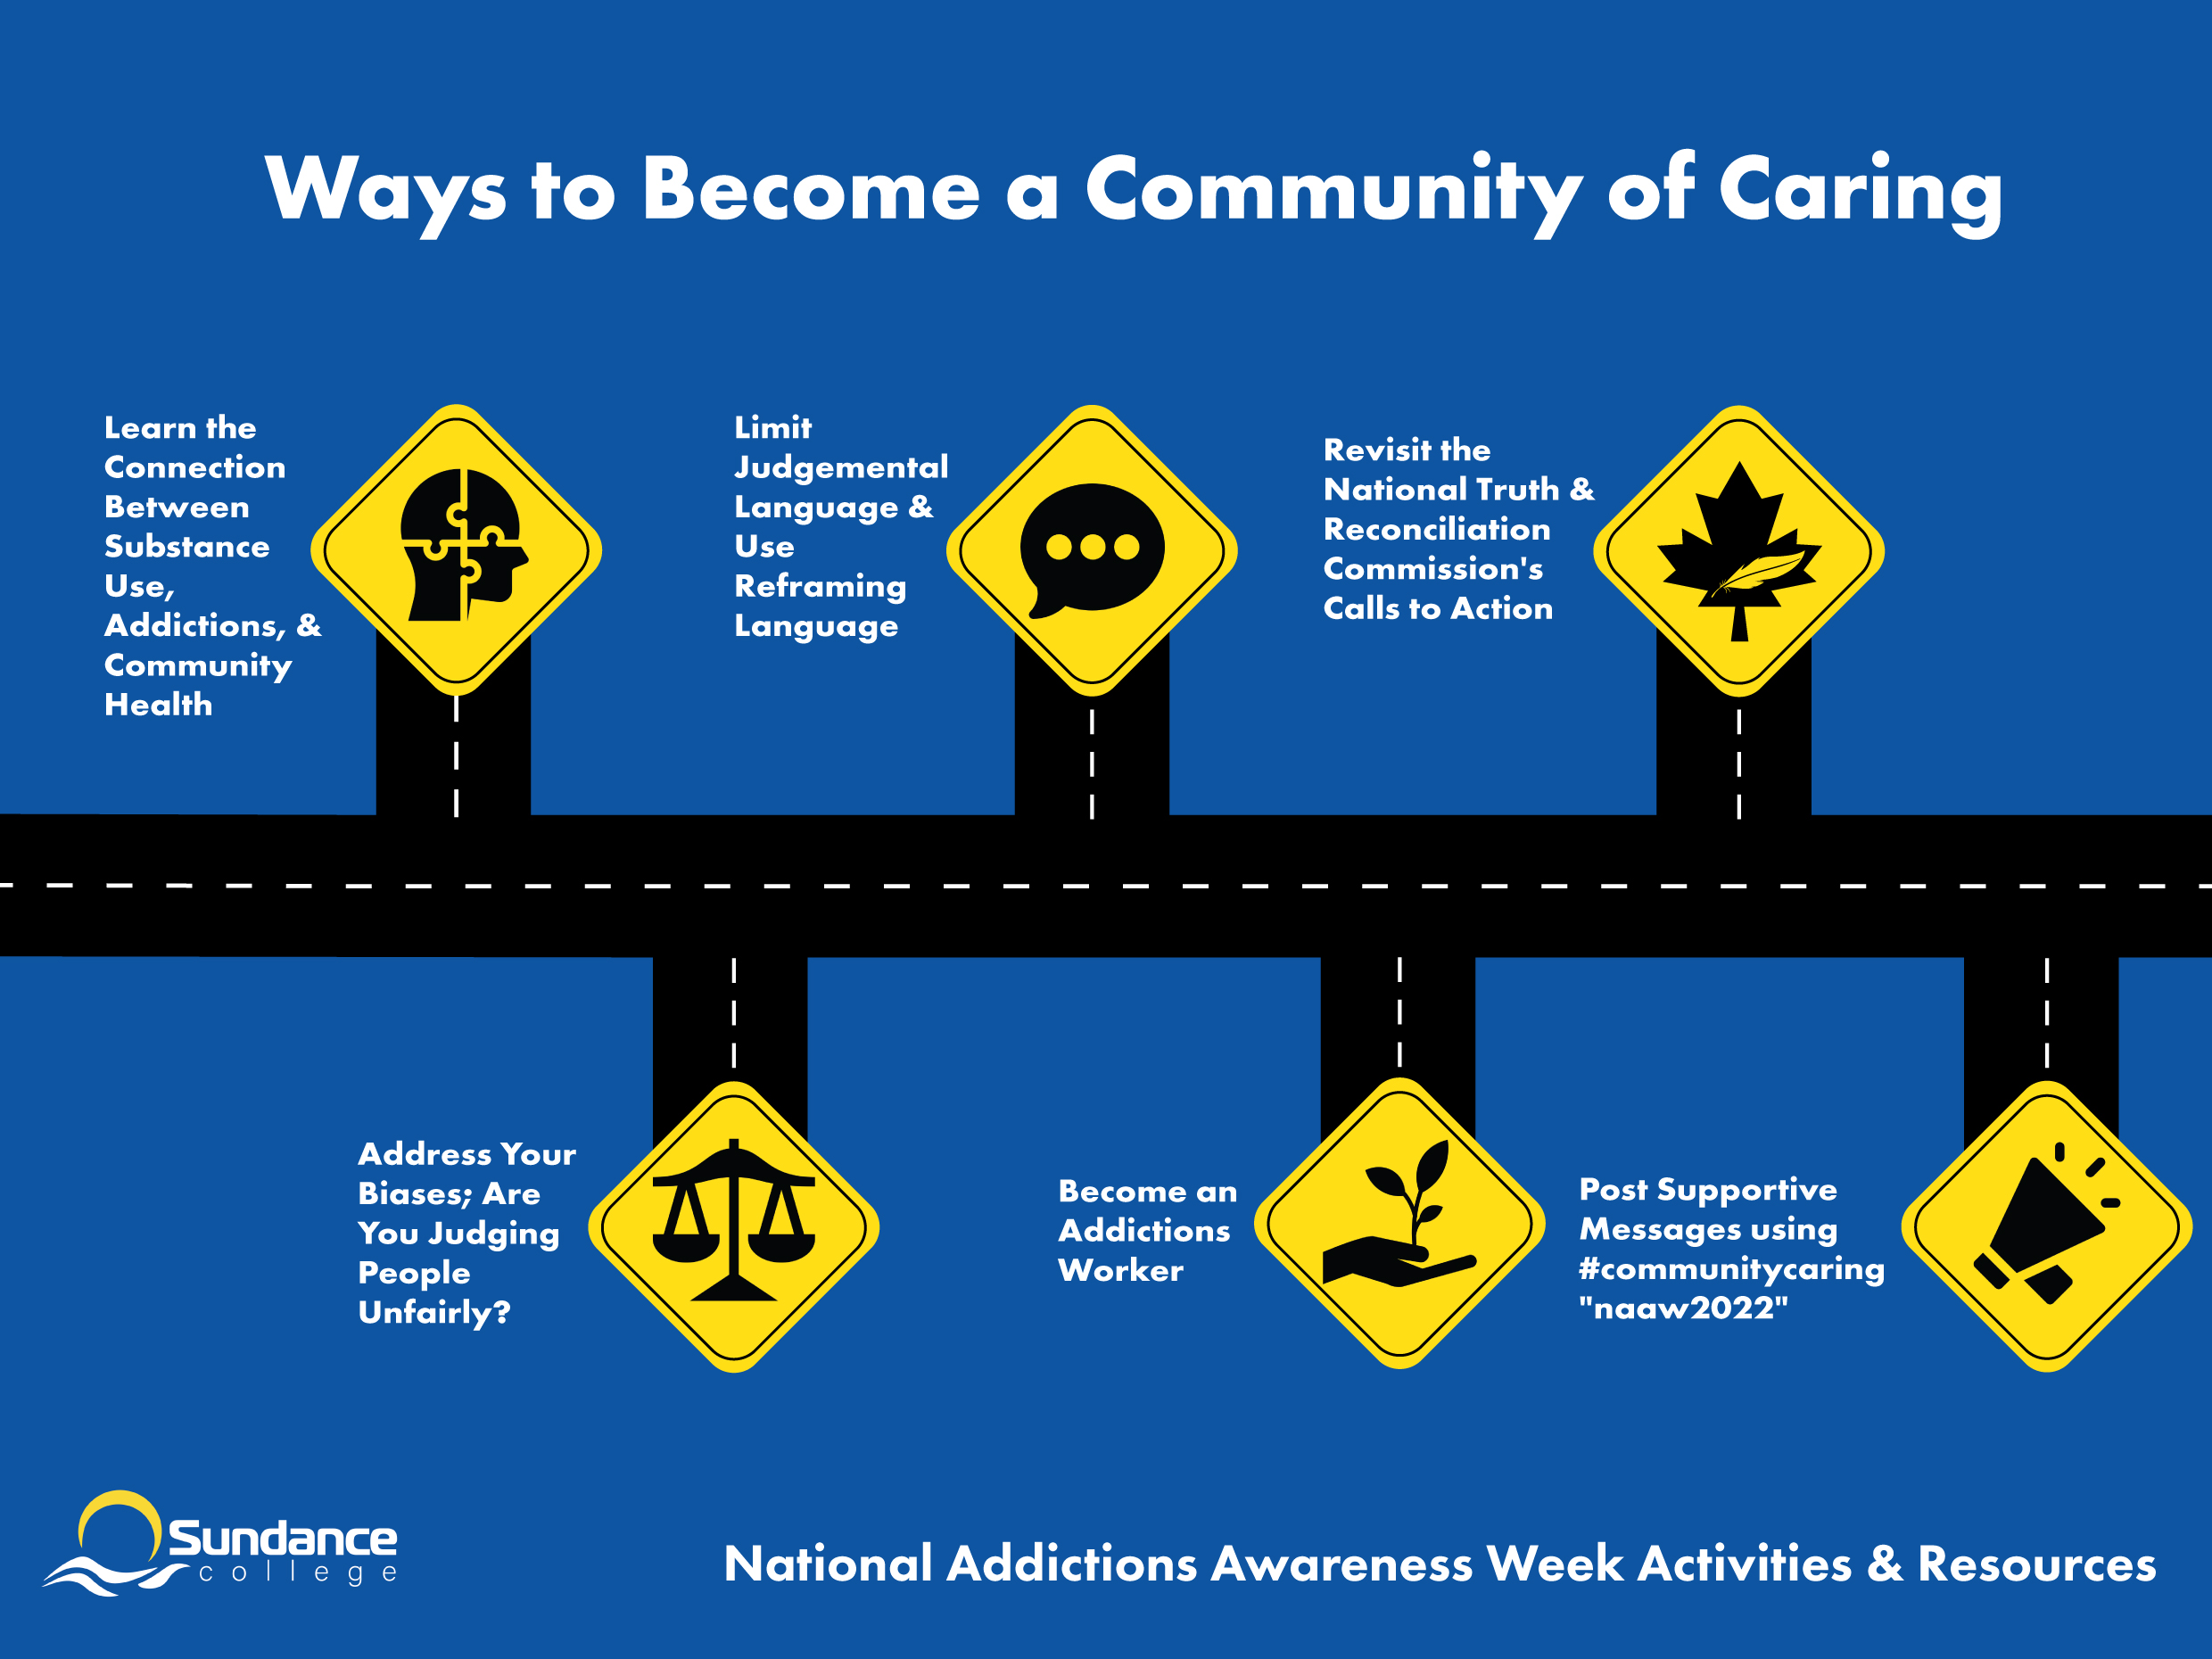 An infographic showing the 6 ways to become a community of caring including: revisiting the national truth & reconciliation commission's calls to action; learning the connection between substance use, addictions, & community health; addressing your biases limiting judgmental language & use reframing language; becoming an addictions worker; and posting supportive messages using #communitycaring and #naaw2022